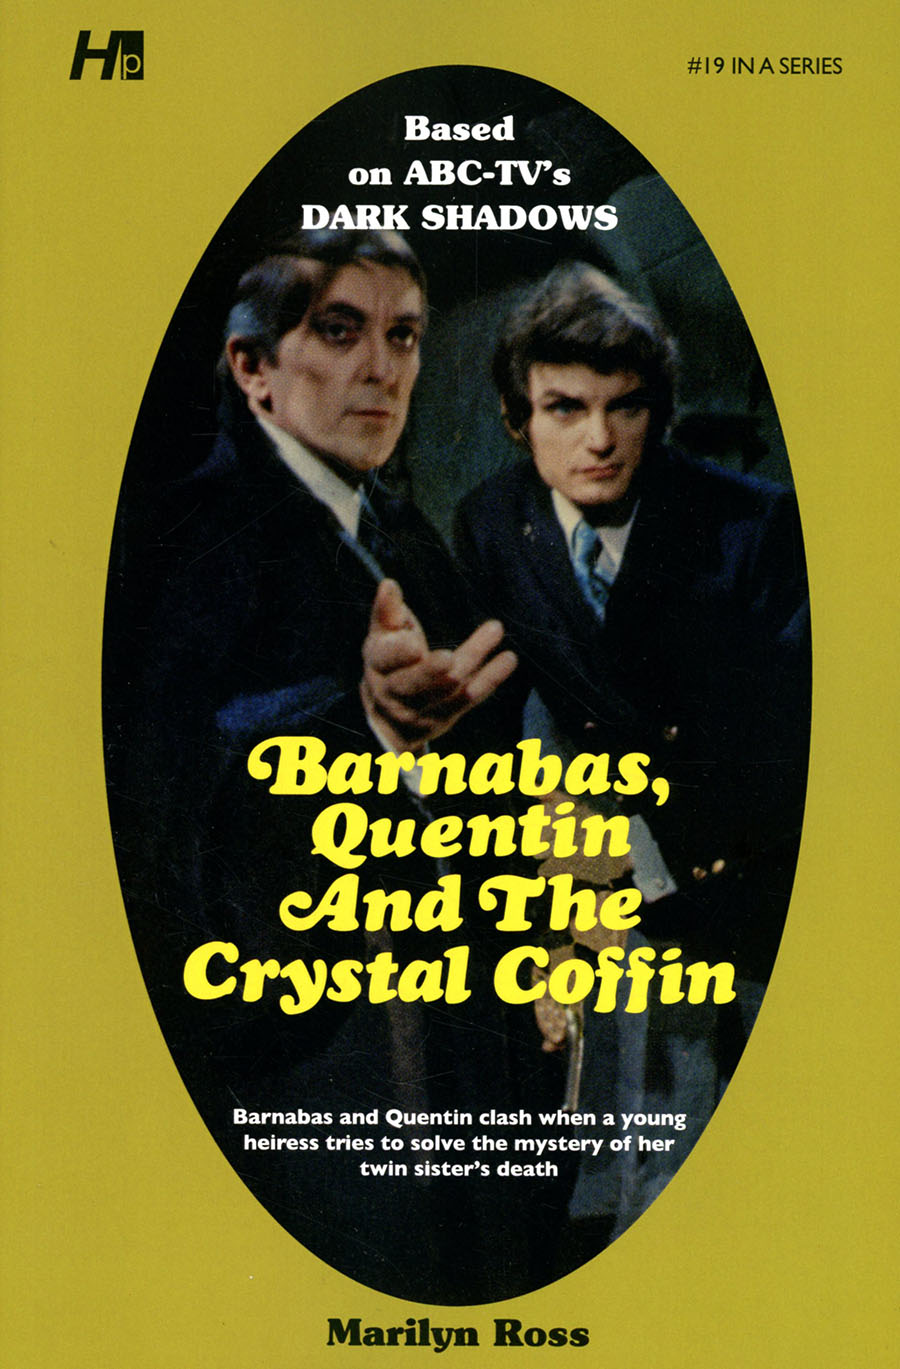 Dark Shadows Paperback Library Novel Vol 19 Barnabas Quentin And The Crystal Coffin TP